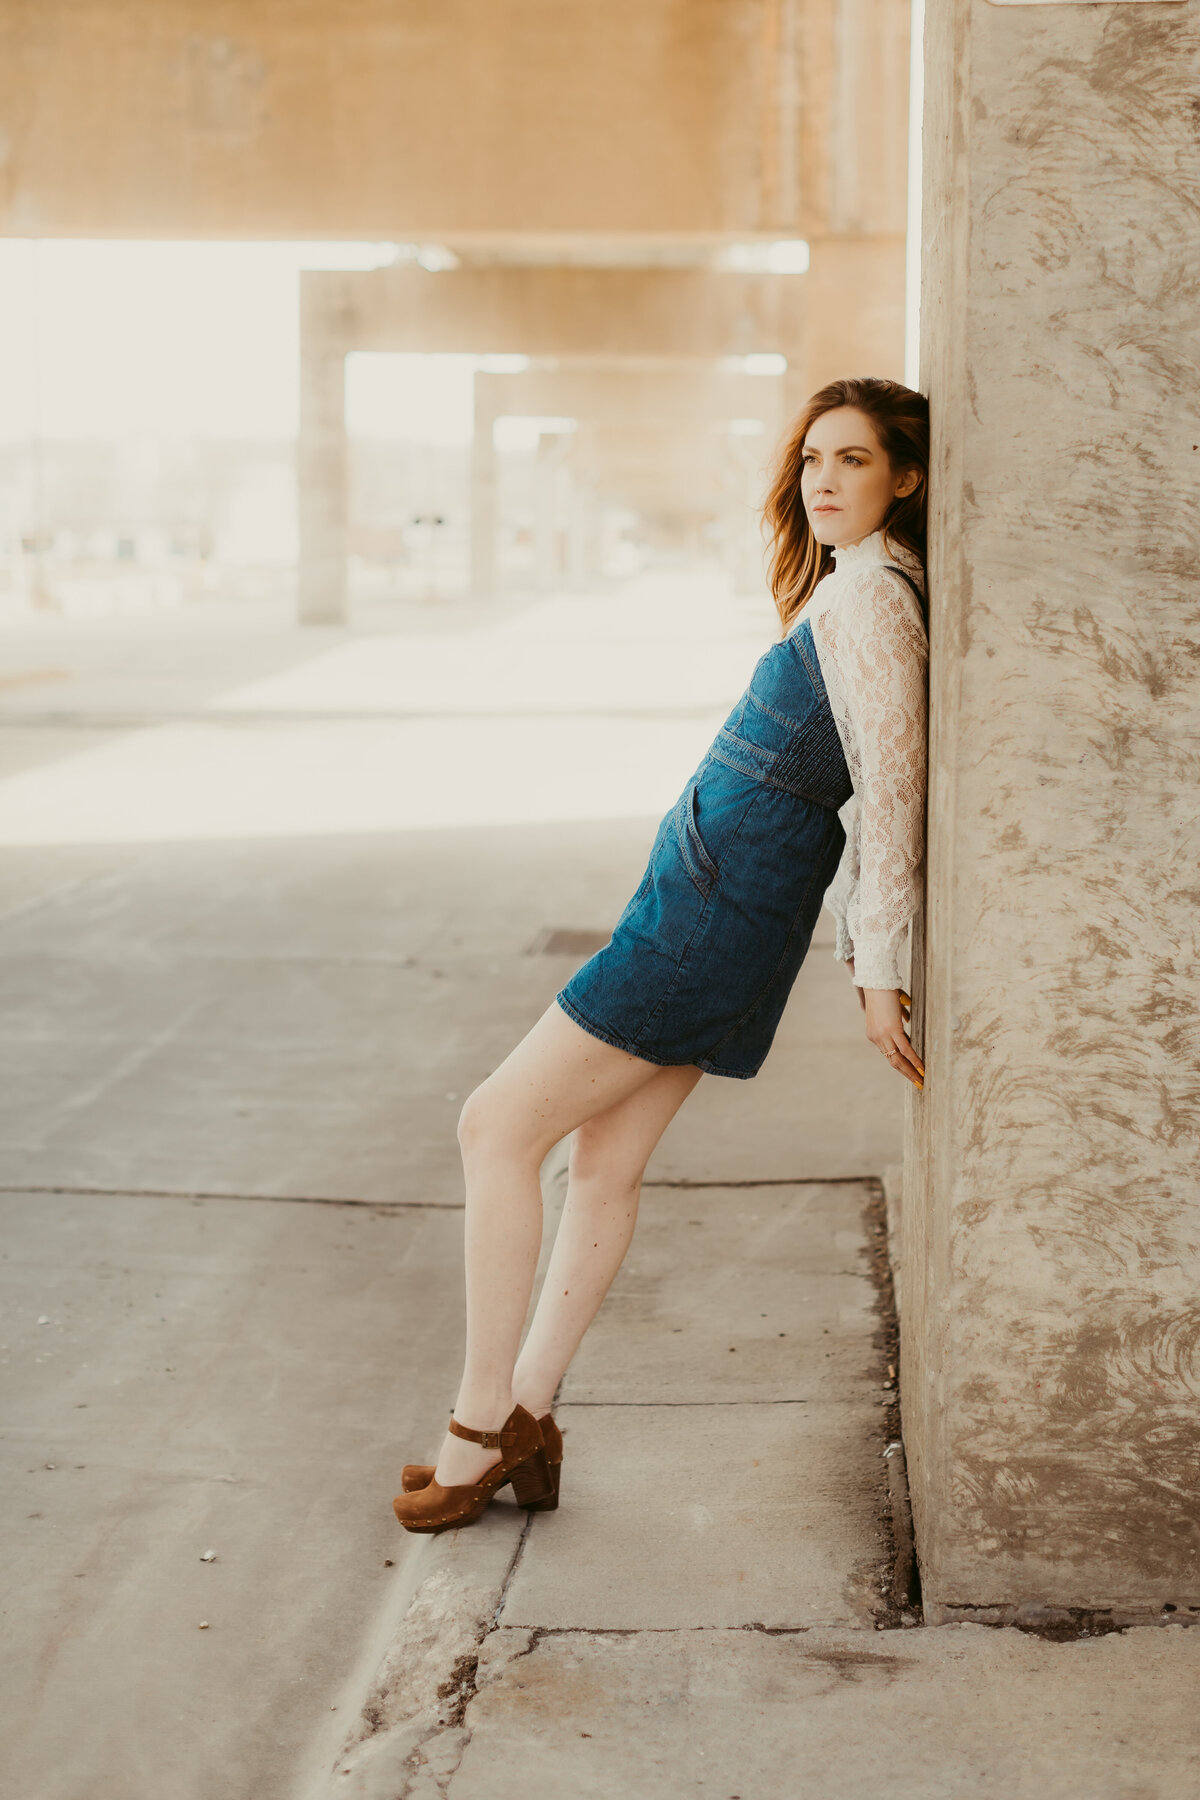 Whitney - Downtown Branding Session (137 of 206)